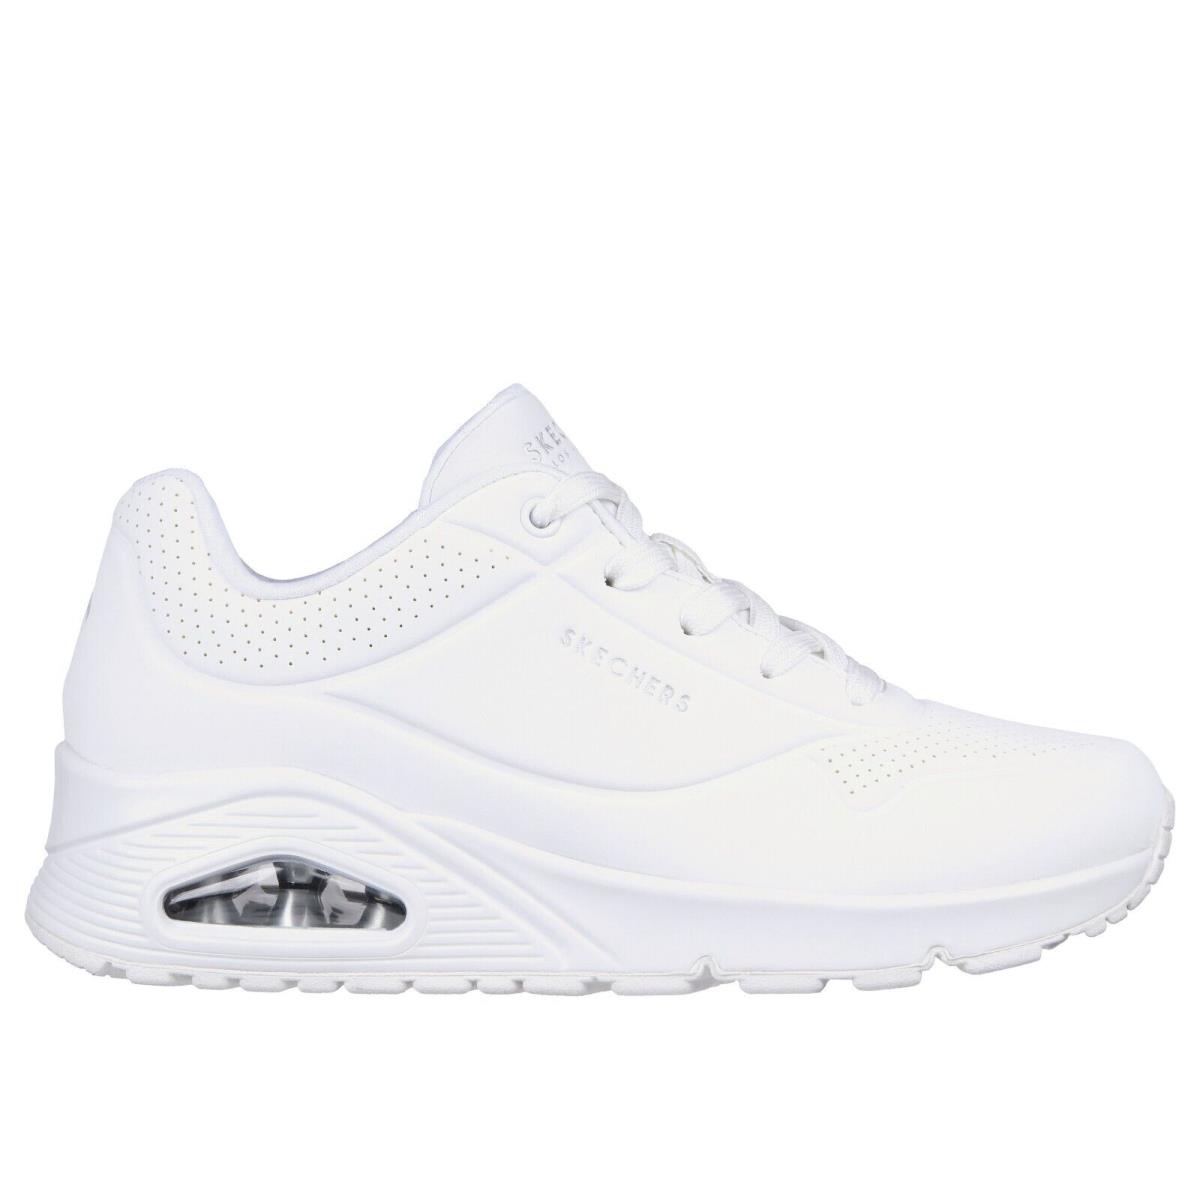 Skechers Women`s Uno - Stand on Air Ultra-light Breathable Sport Shoes Sneakers White